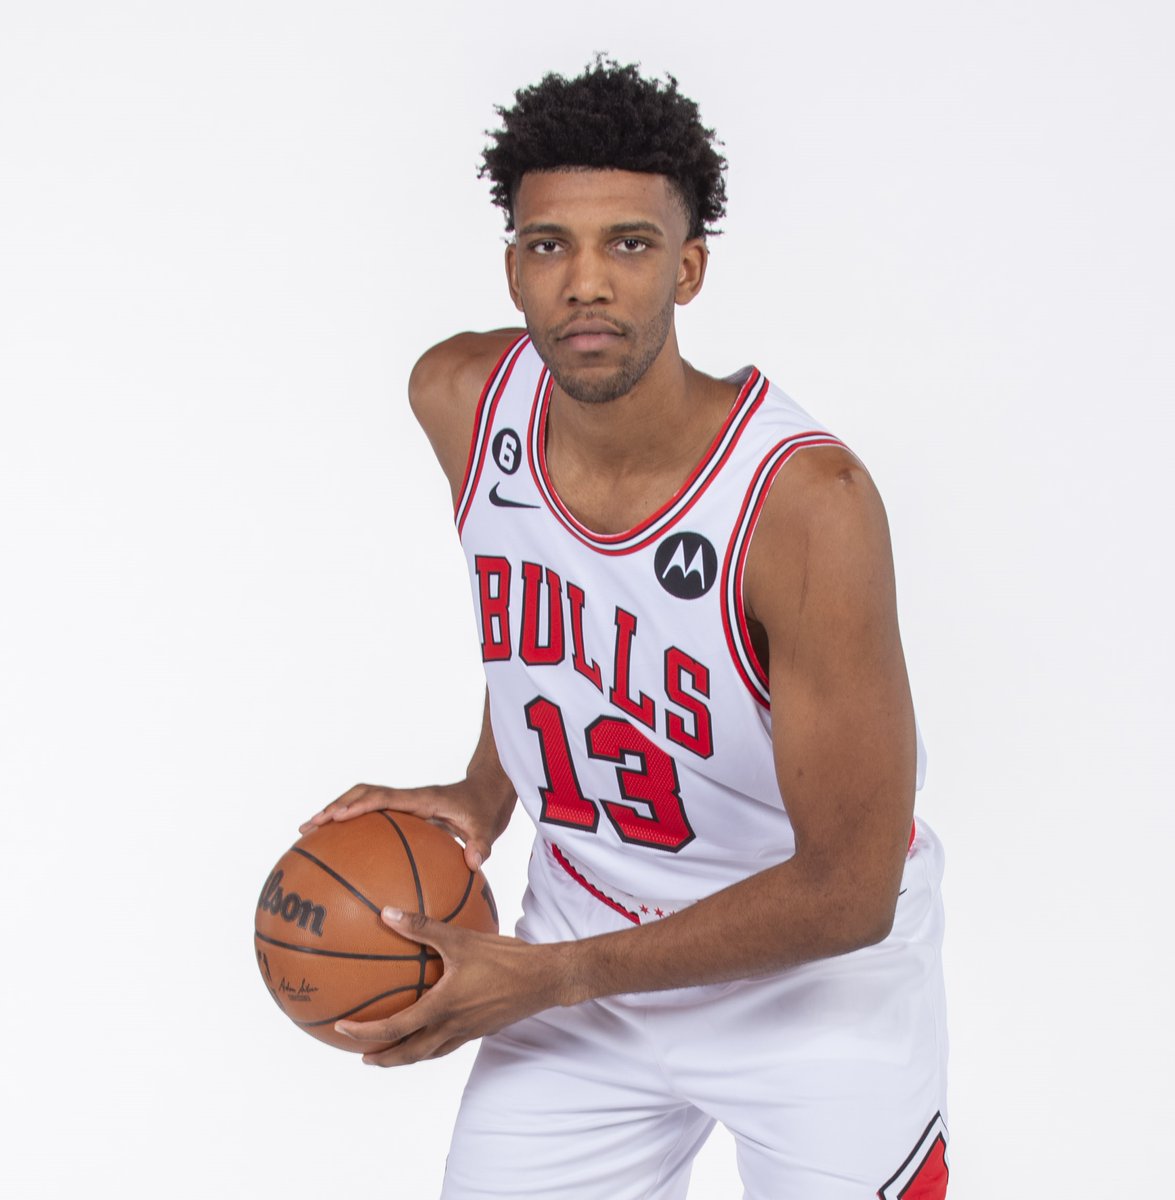 Join us in wishing @ToBrad1 of the @chicagobulls a HAPPY 25th BIRTHDAY! #NBABDAY